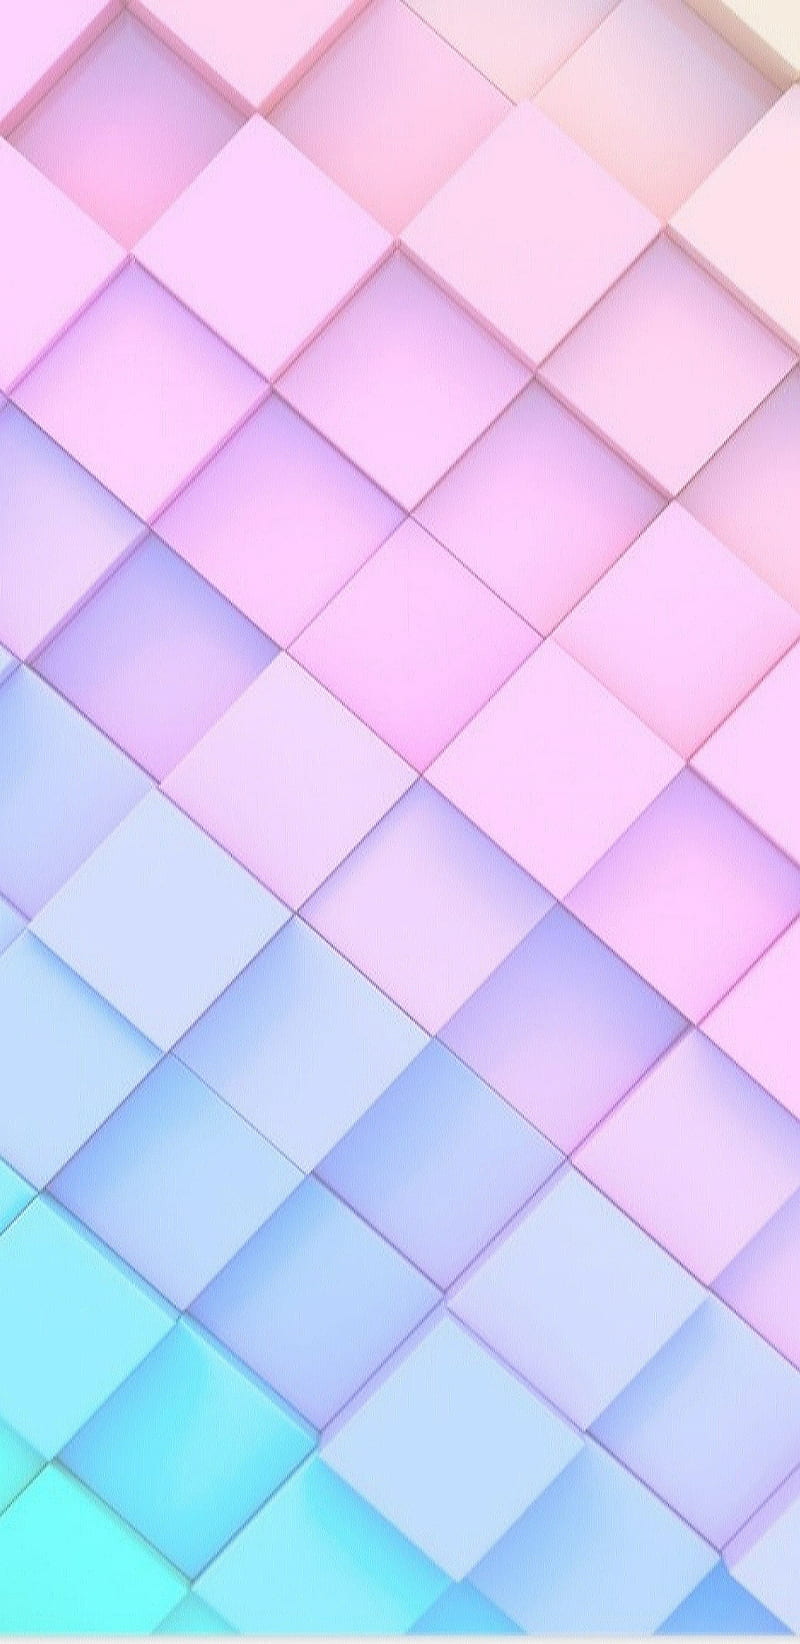 Pastel Squares, background, blue, colorful, cute, pink, pretty, purple, HD  phone wallpaper | Peakpx